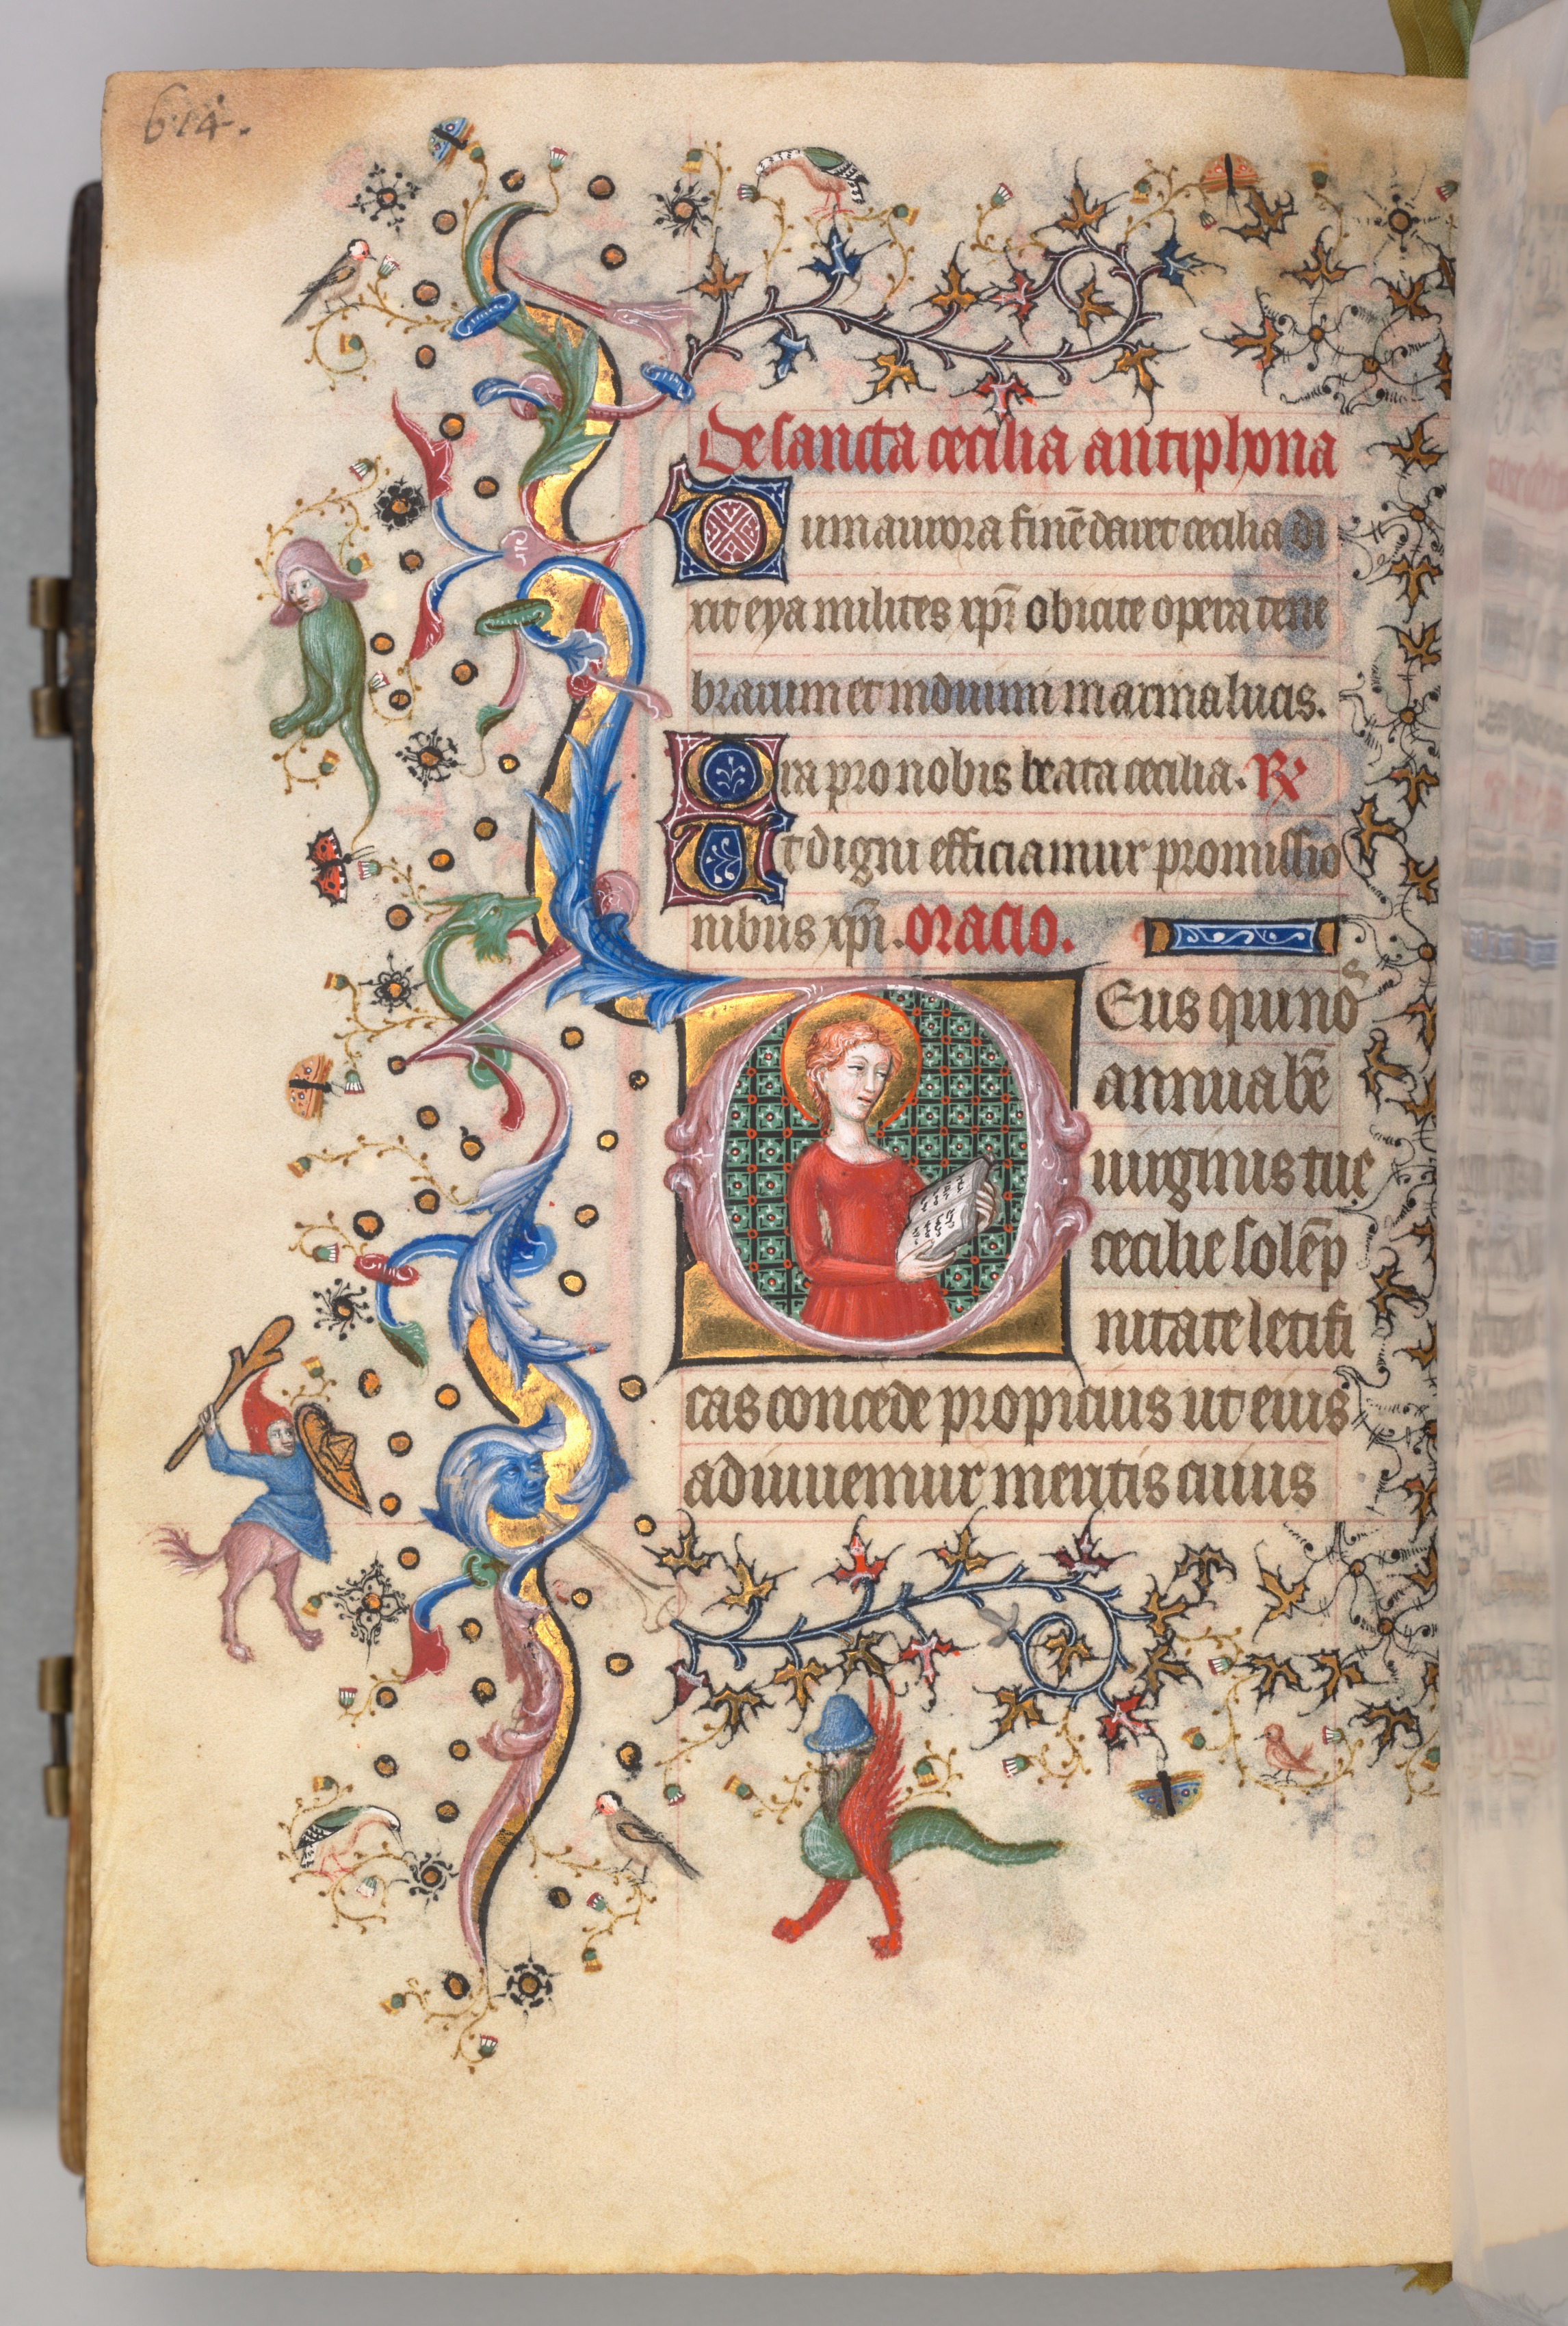 Hours of Charles the Noble, King of Navarre (1361-1425): fol. 301v, St. Cecilia